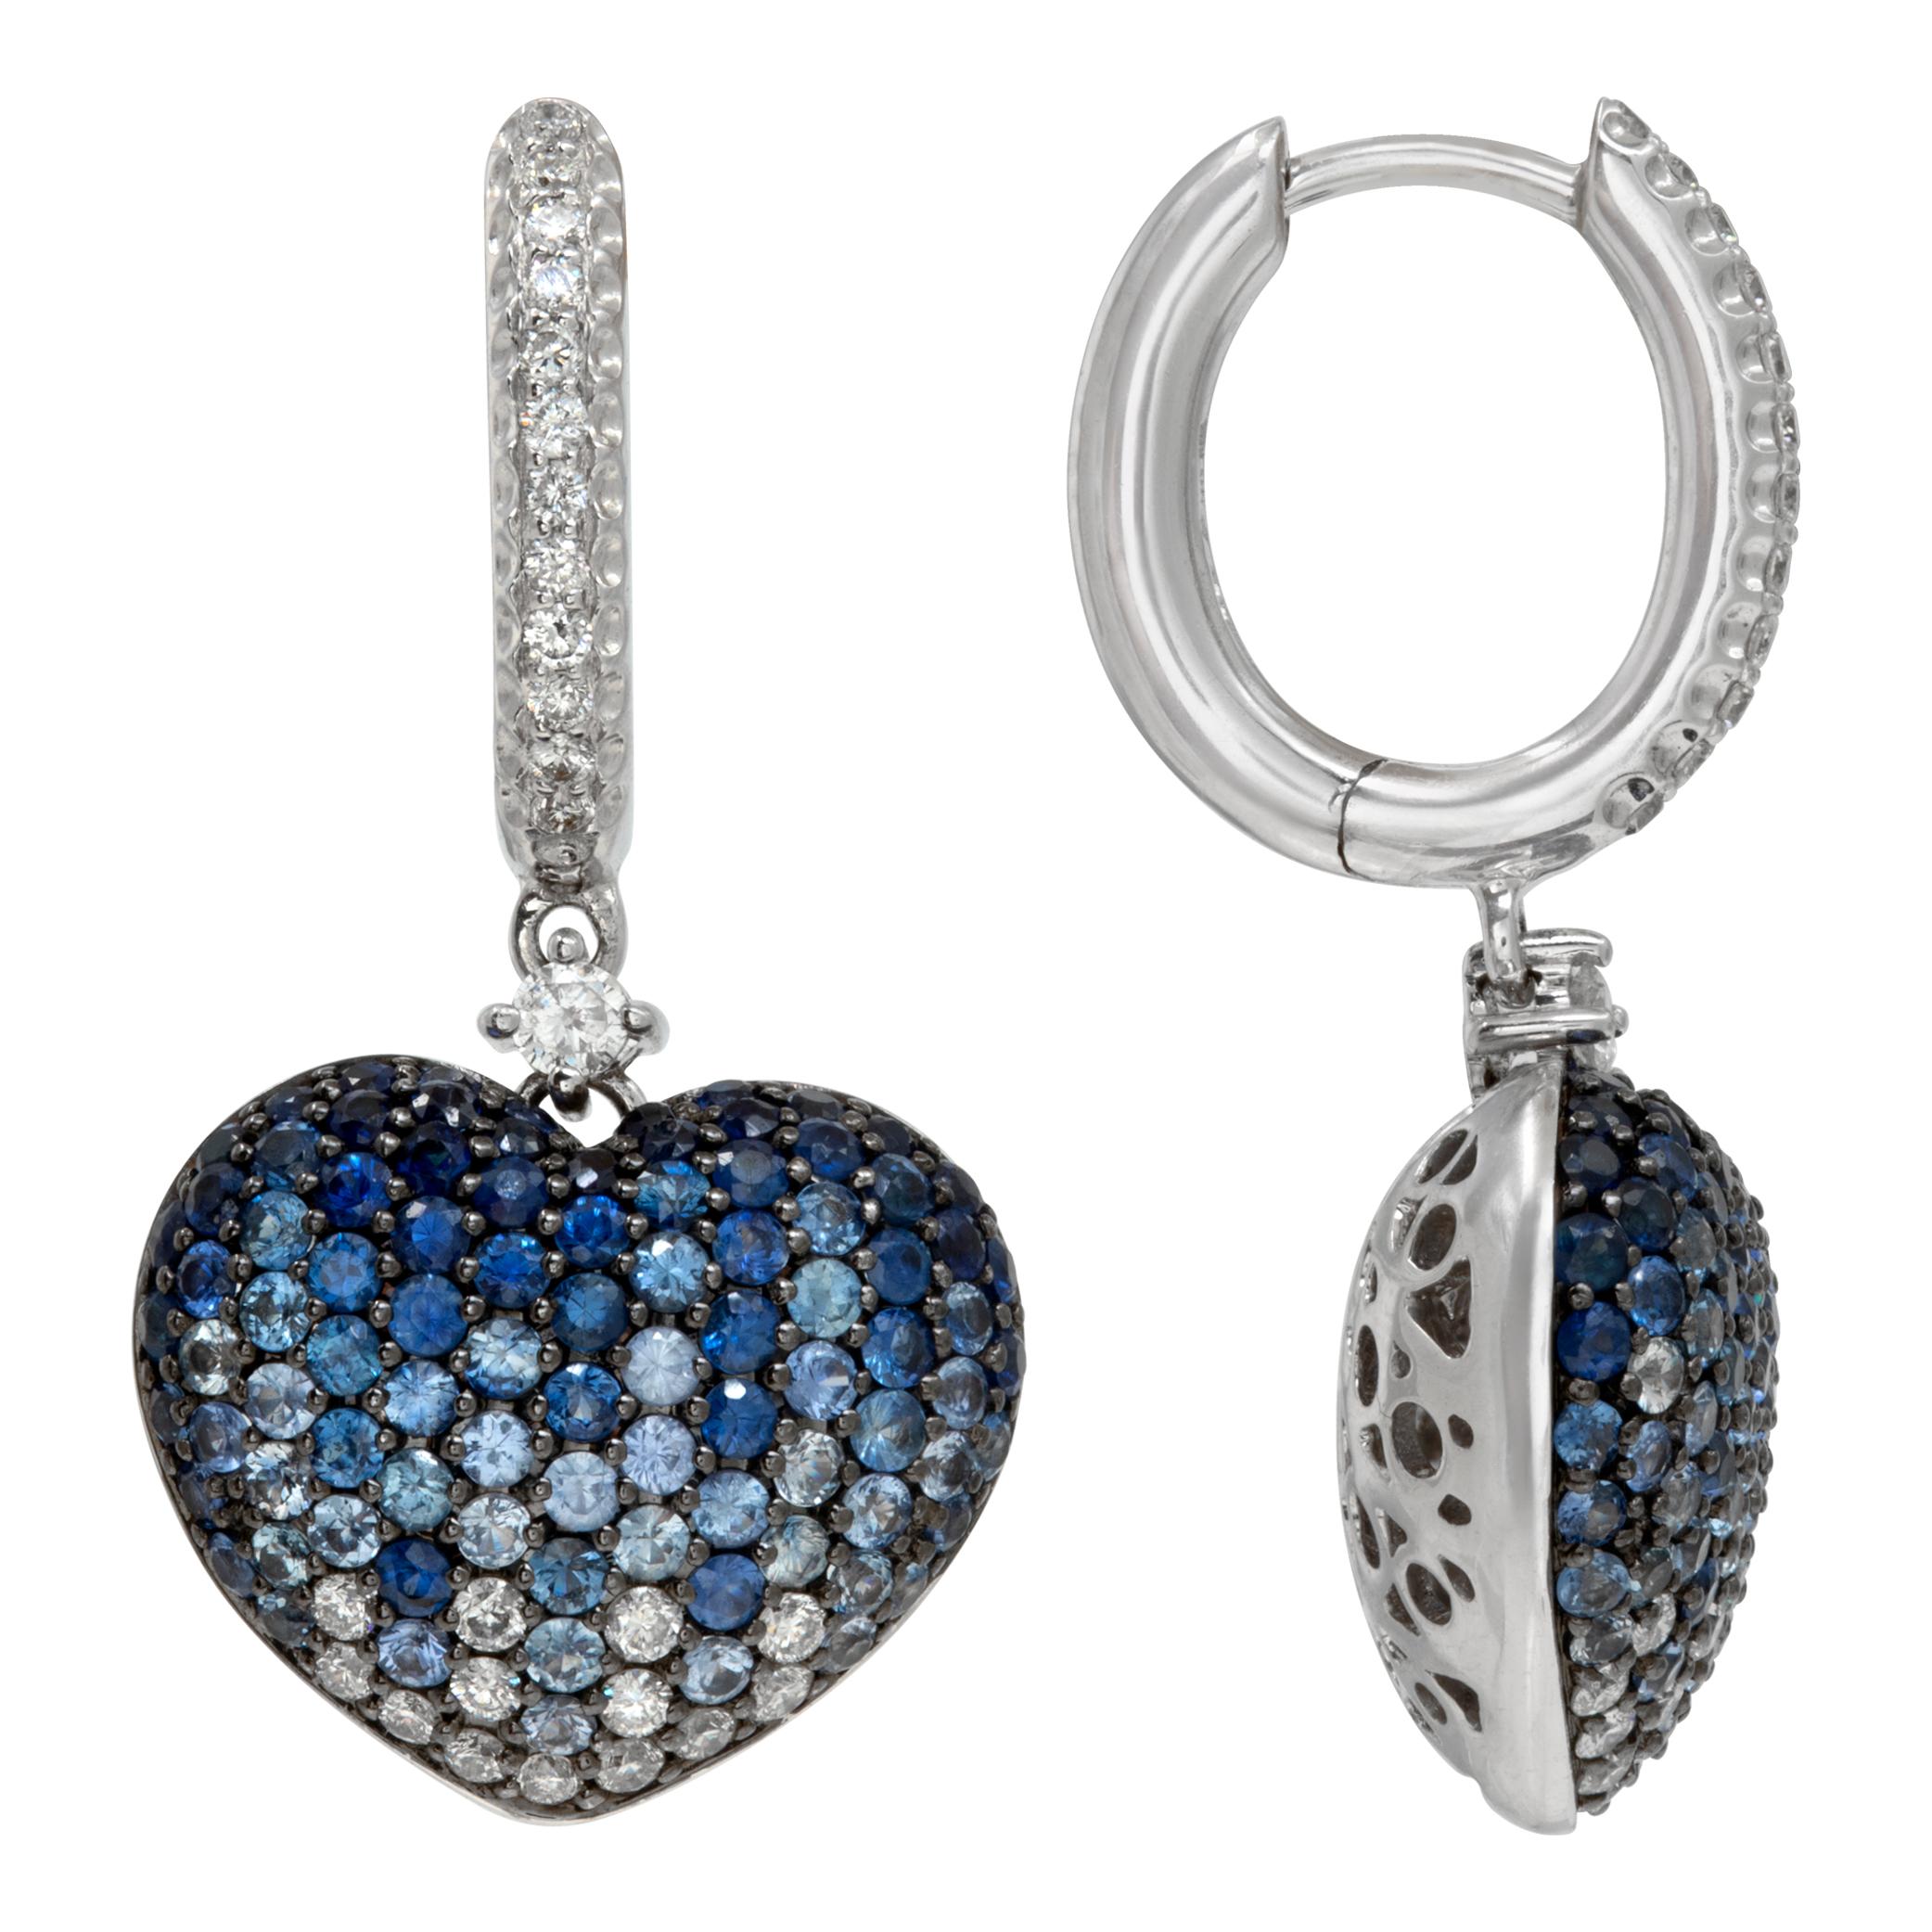 Sapphire & diamond 18k white gold heart dangling earrings In Excellent Condition For Sale In Surfside, FL